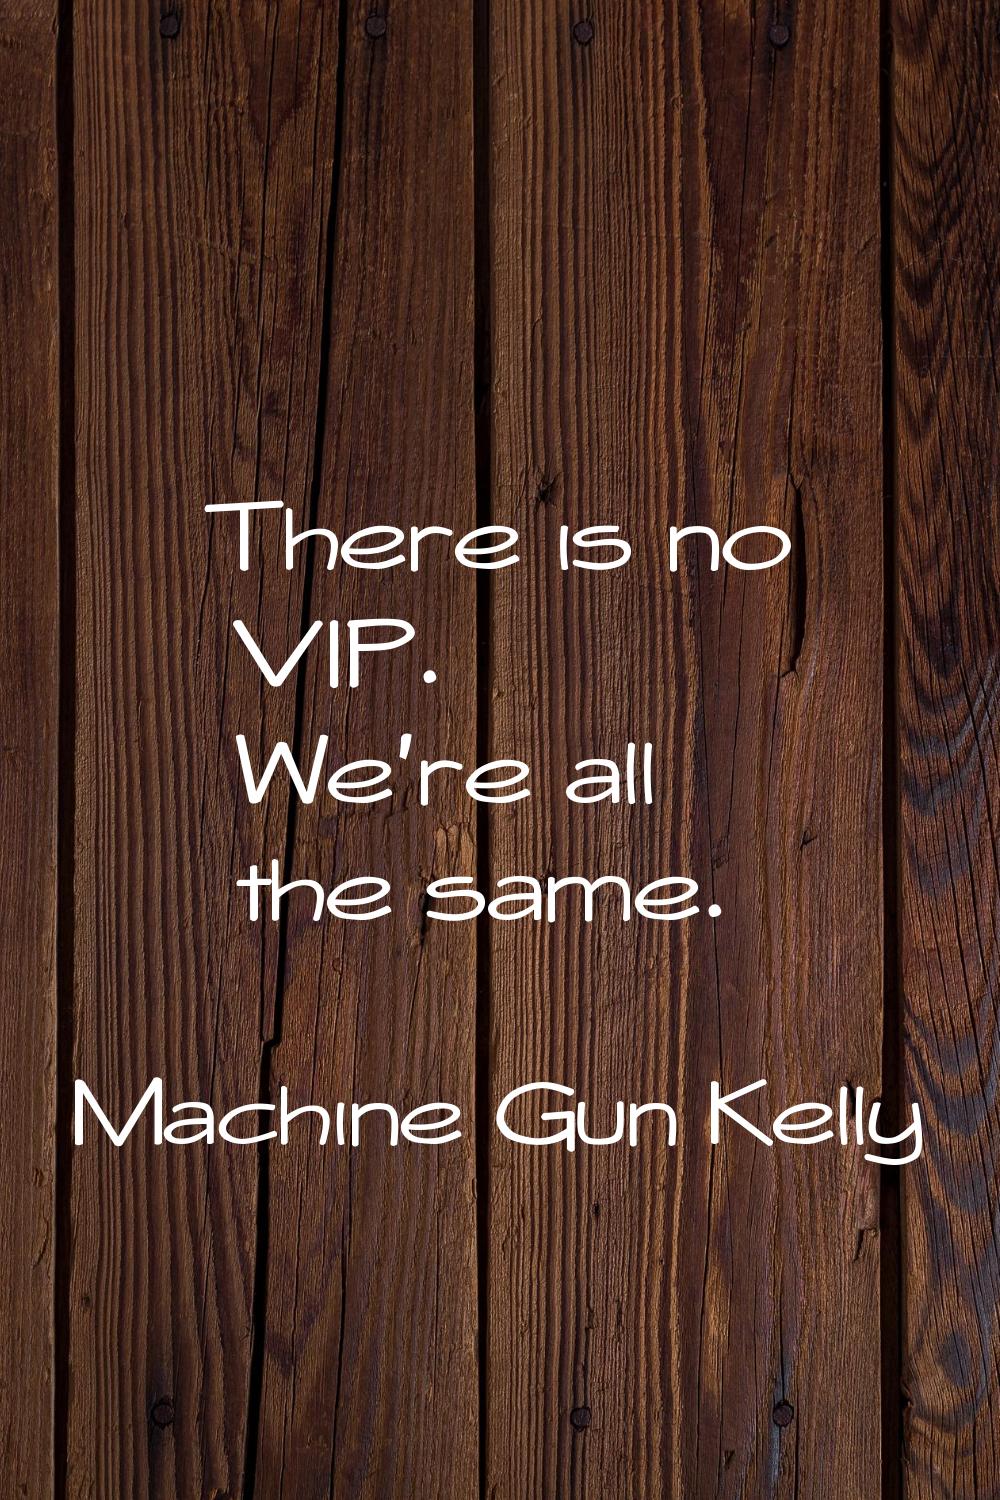 There is no VIP. We're all the same.